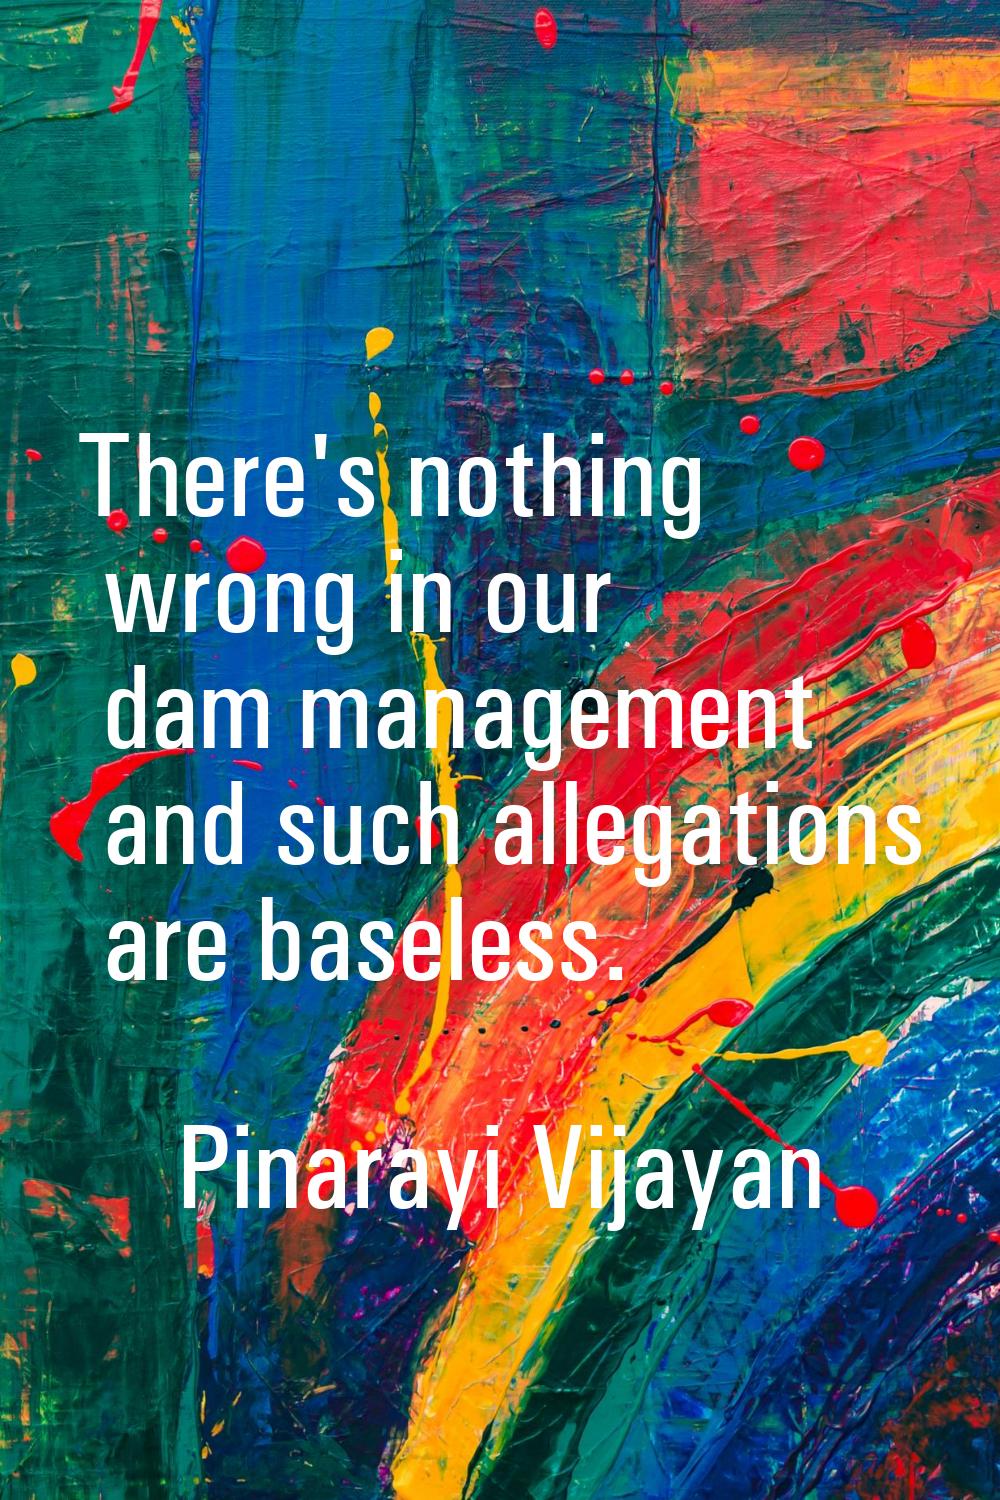 There's nothing wrong in our dam management and such allegations are baseless.